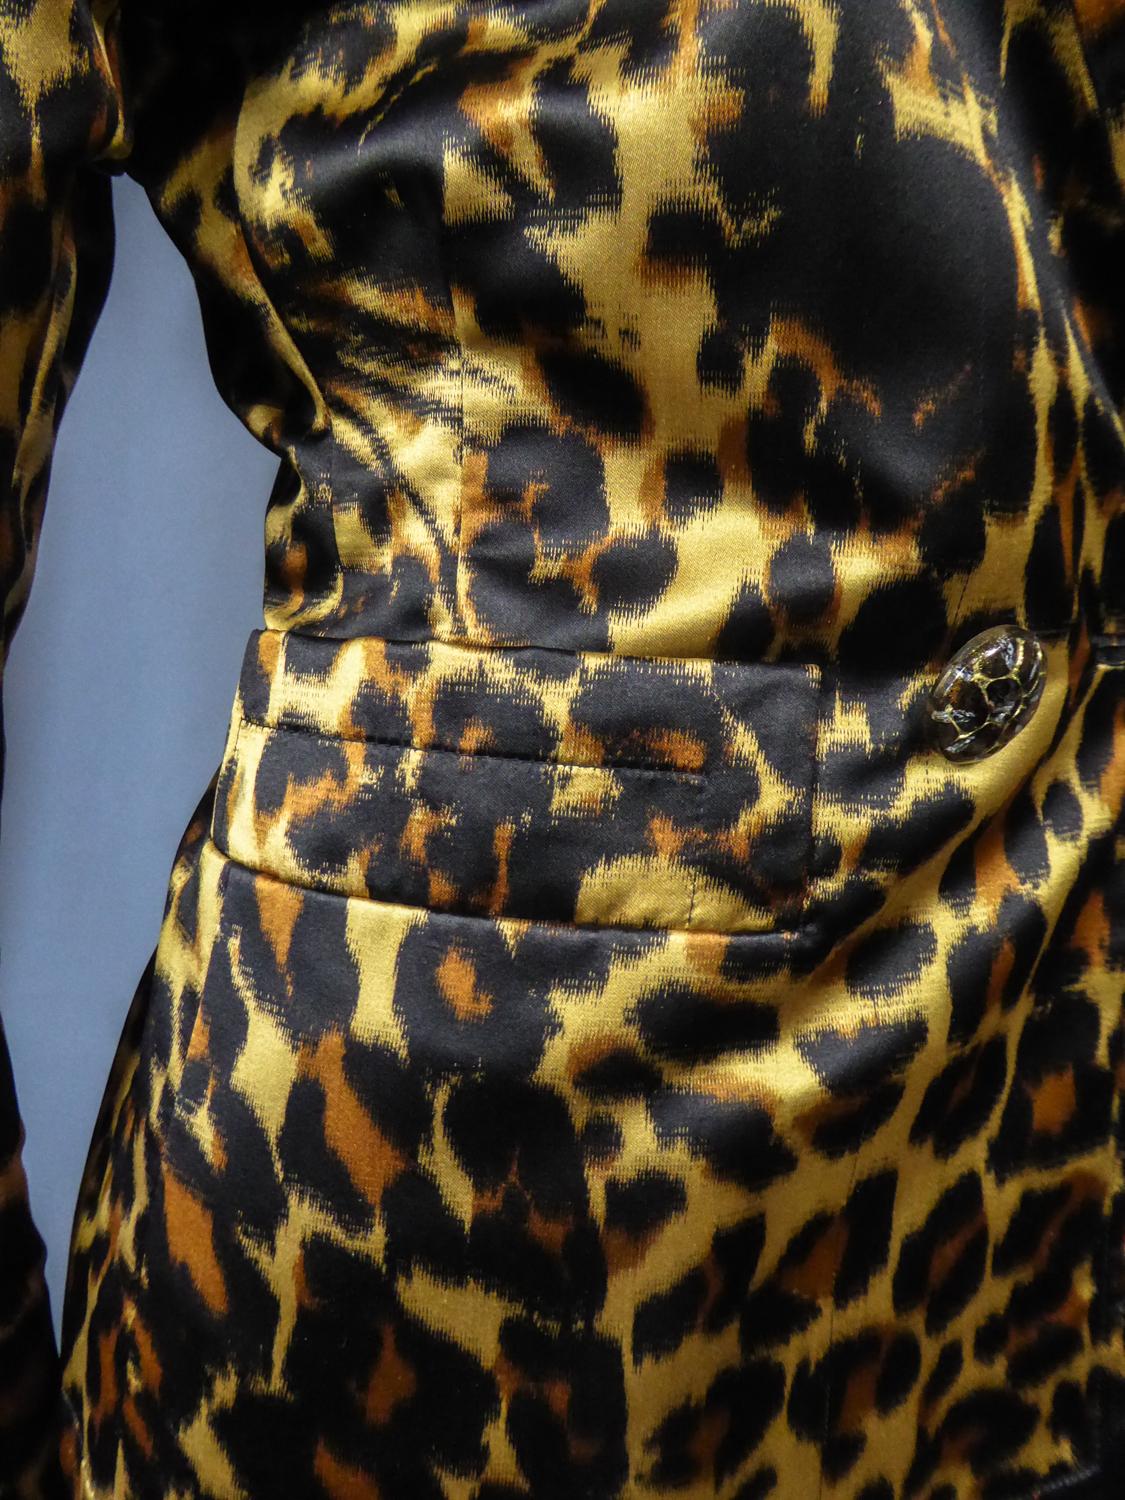 Yves Saint Laurent Printed Panther Satin (attributed to) Skirt Suit Circa 1990 For Sale 5